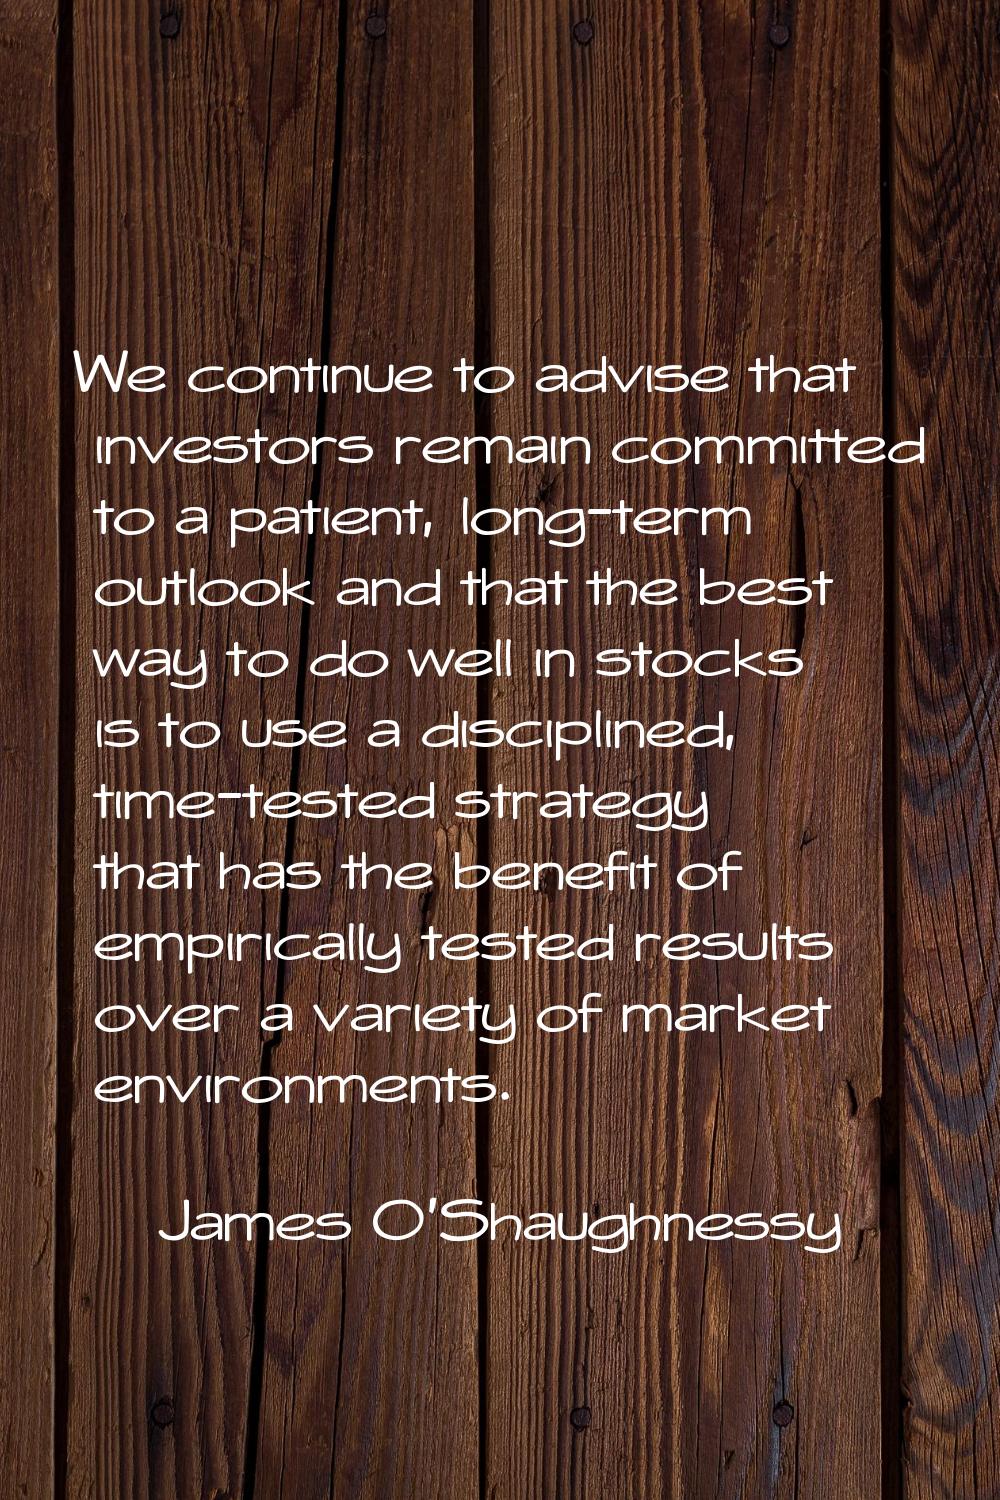 We continue to advise that investors remain committed to a patient, long-term outlook and that the 